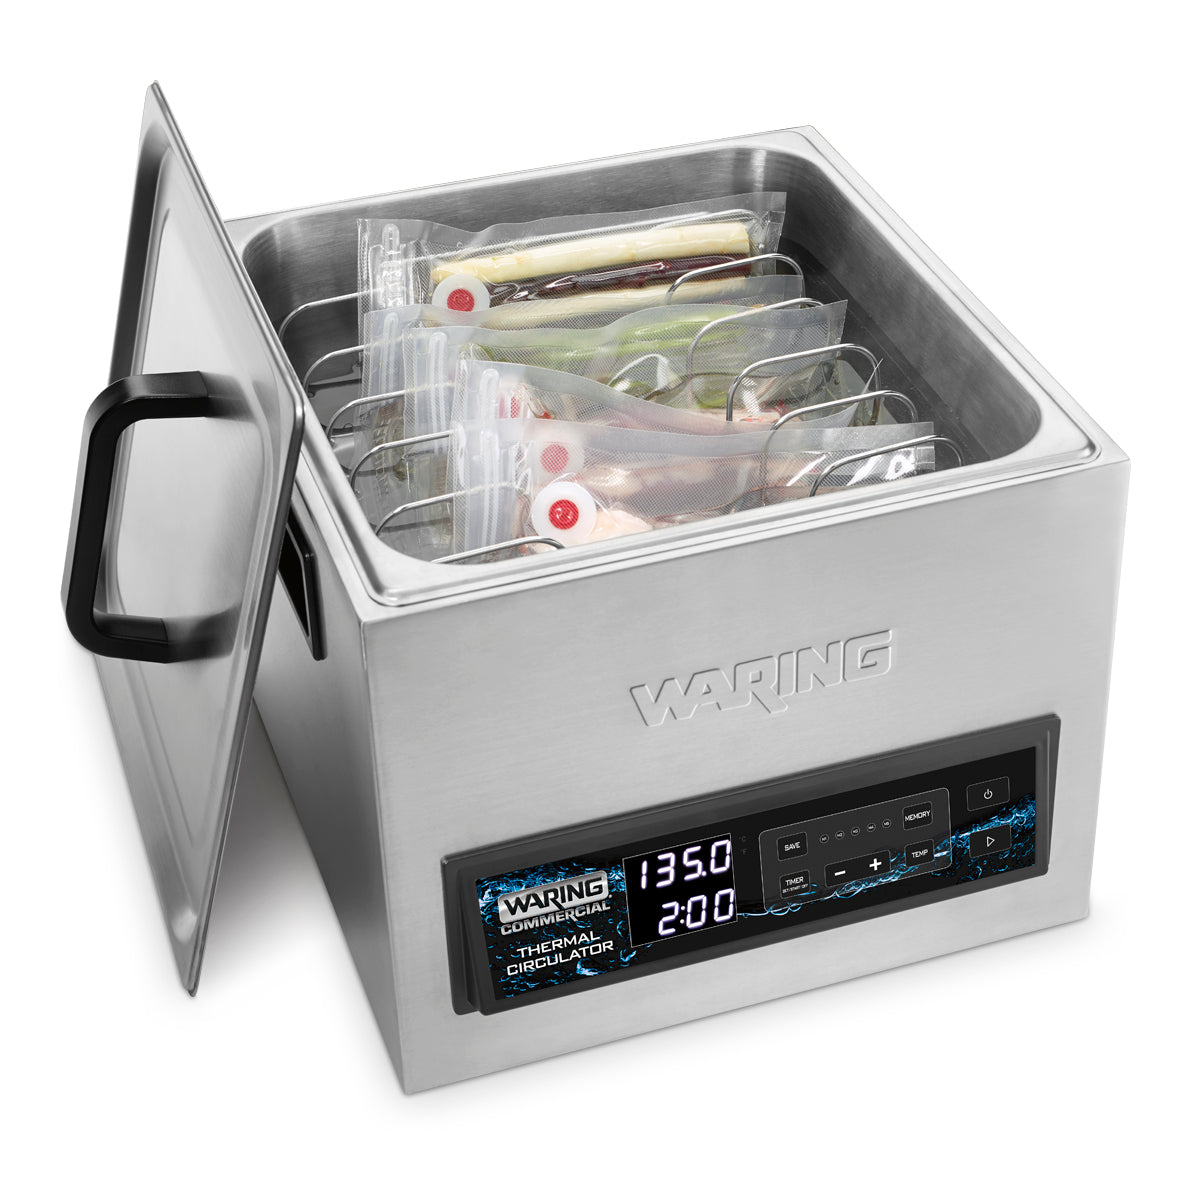 WSV16 Commercial 16-liter Sous Vide Thermal Circulator by Waring Commercial